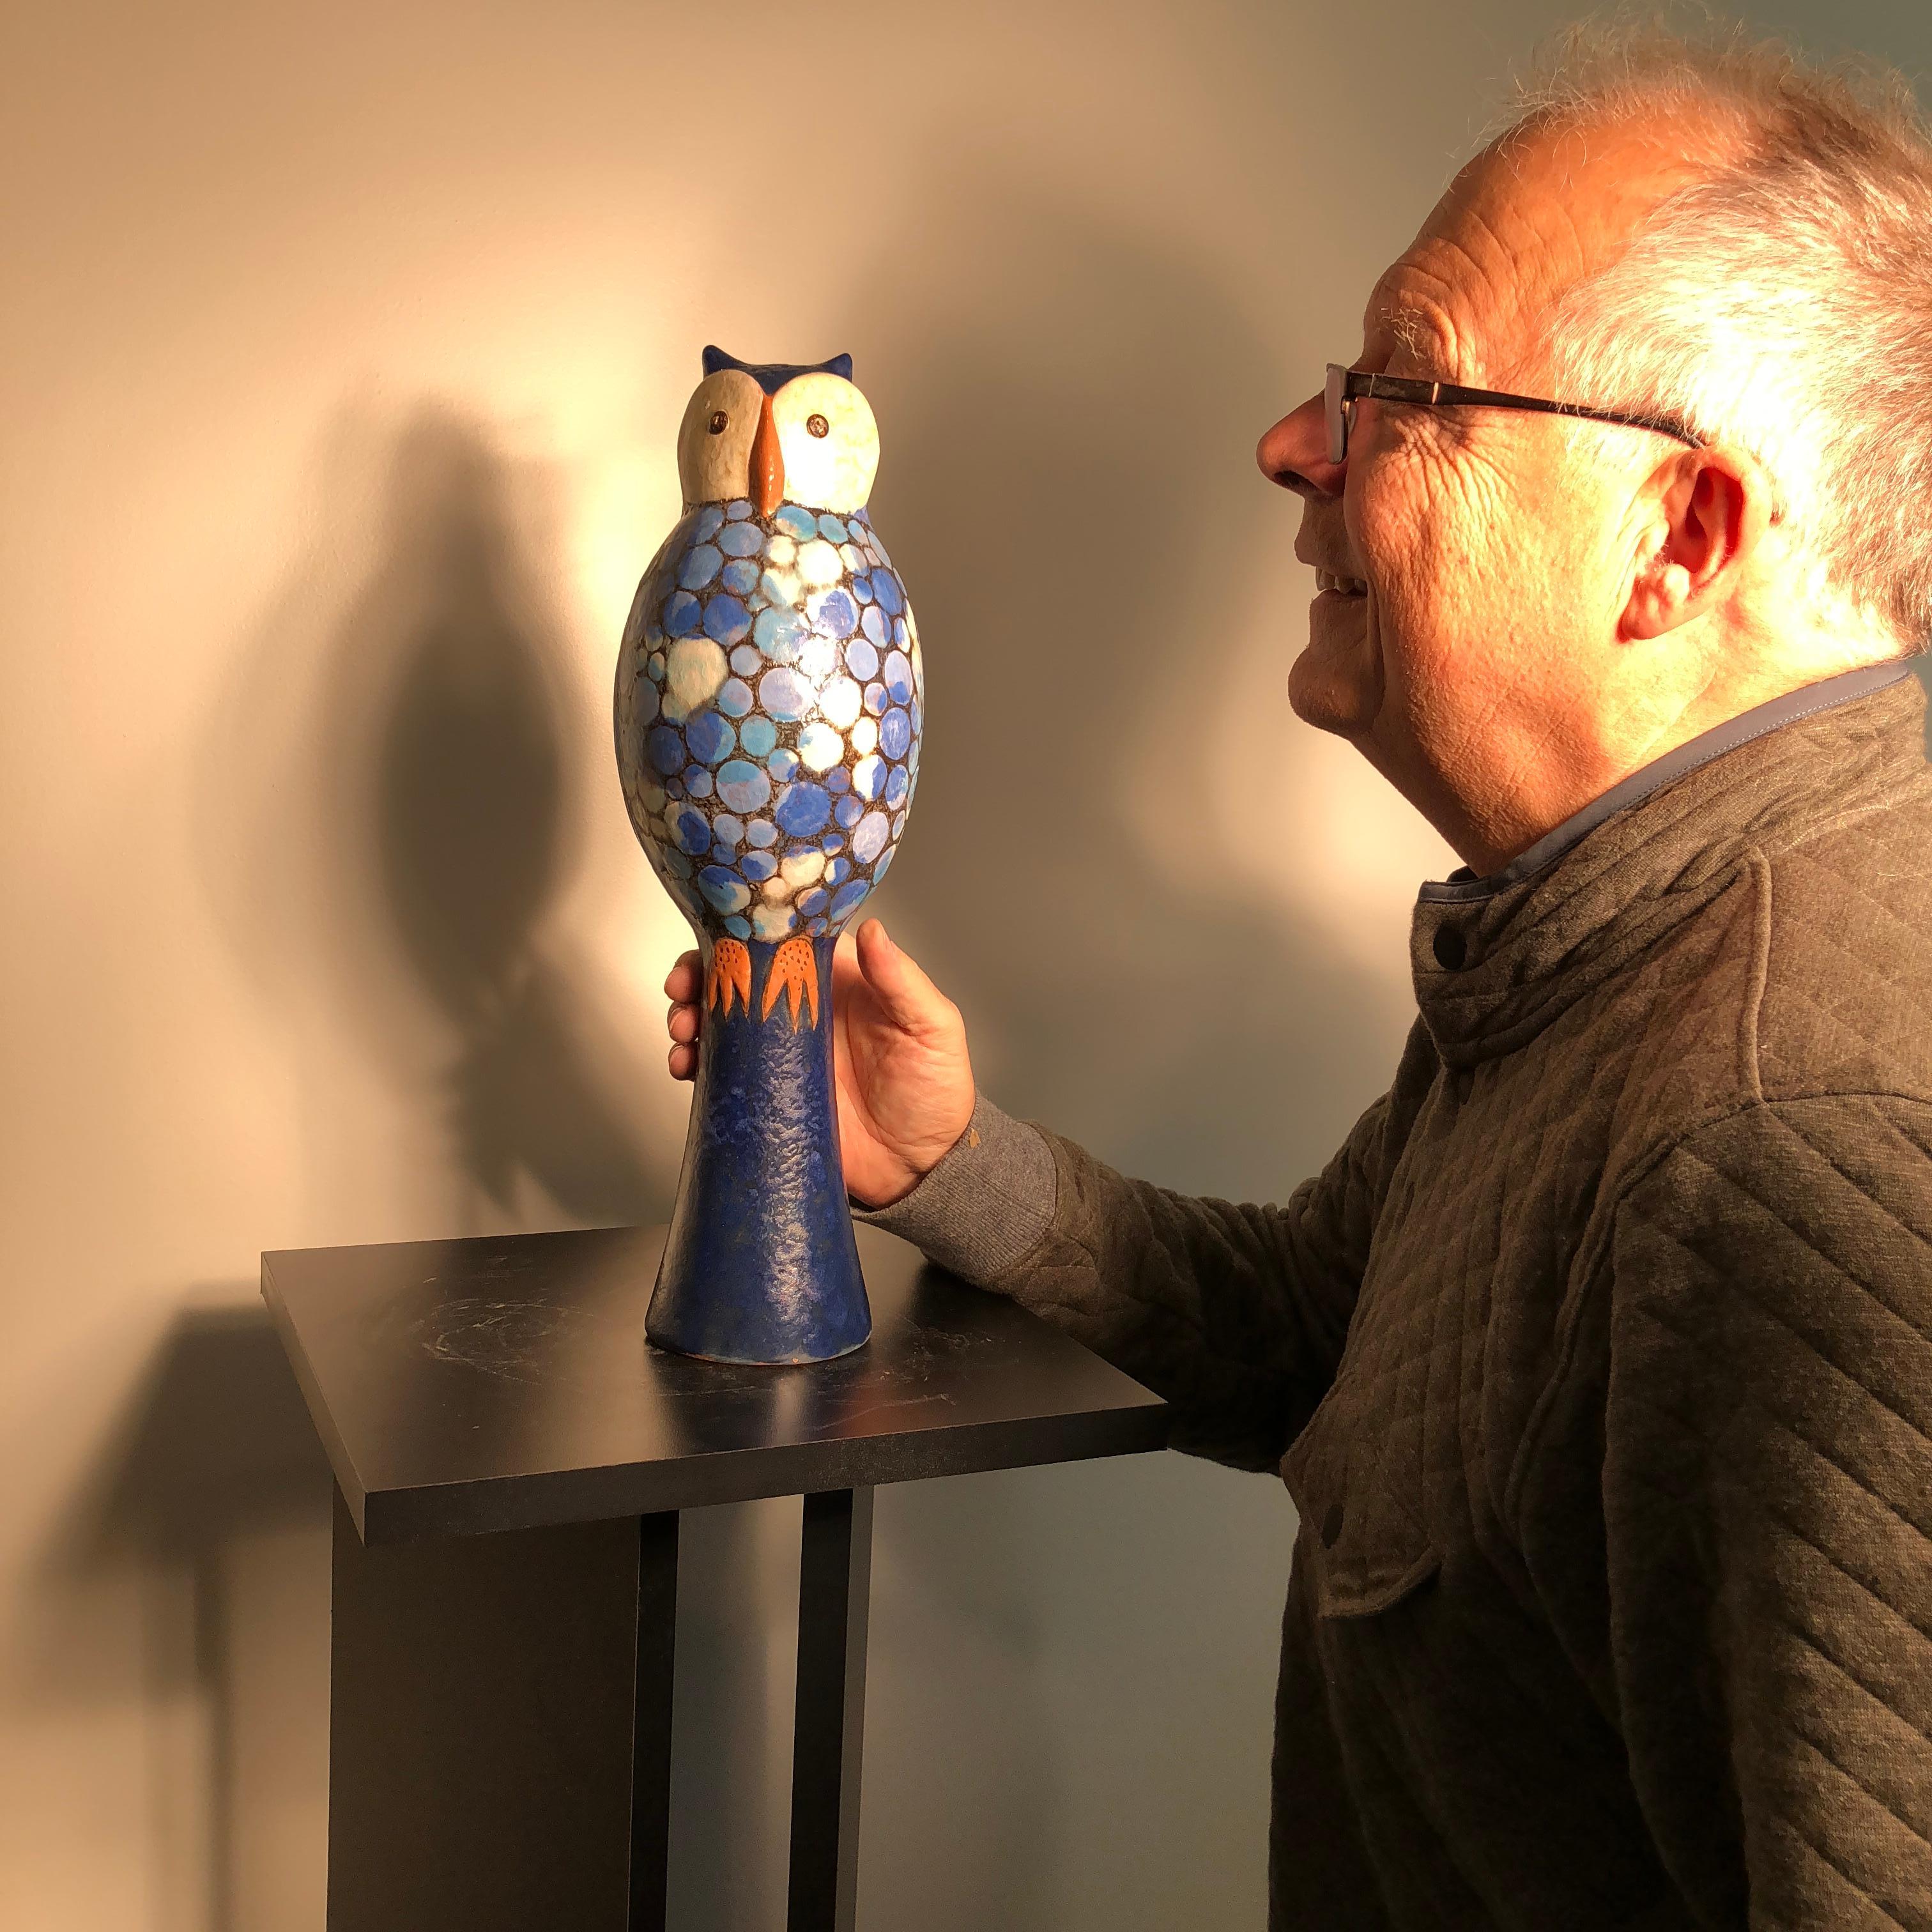 This is a wonderful handmade, hand painted and hand glazed Mid-Century Modern ceramic effigy of a perched owl by master designer Eva Fritz-Lindner (1933-2017). It was designed about 1977 by her at the Karlsruhe Staatliche Majolika Manufaktur where